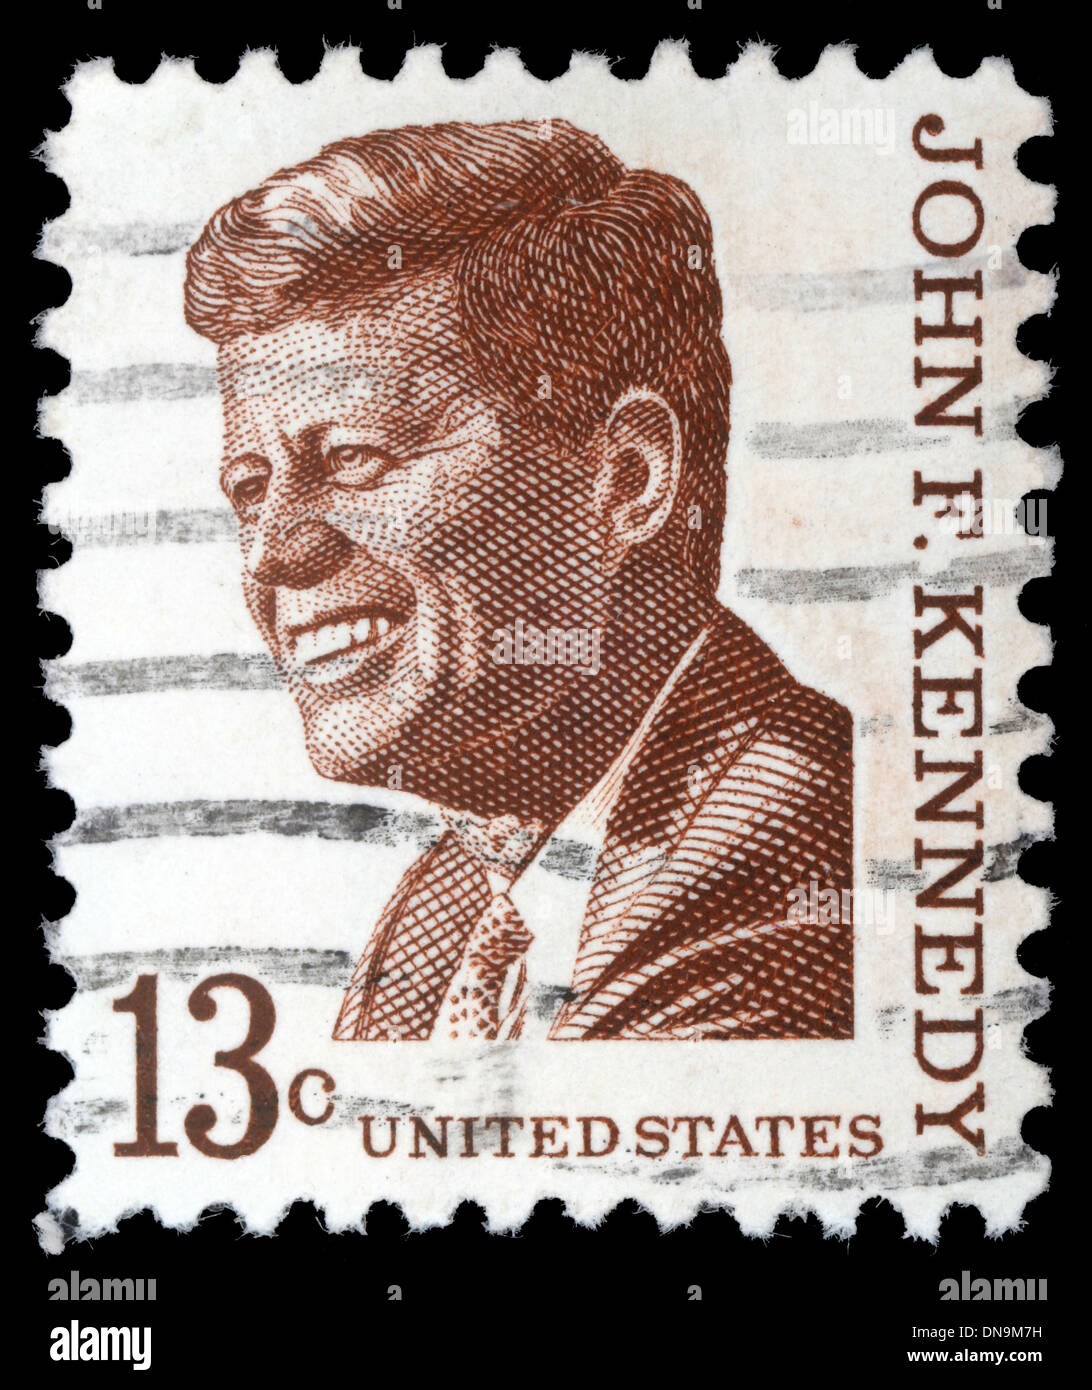 UNITED STATES OF AMERICA - CIRCA 1967: Stamp printed by United States shows President John Kennedy, circa 1967 Stock Photo